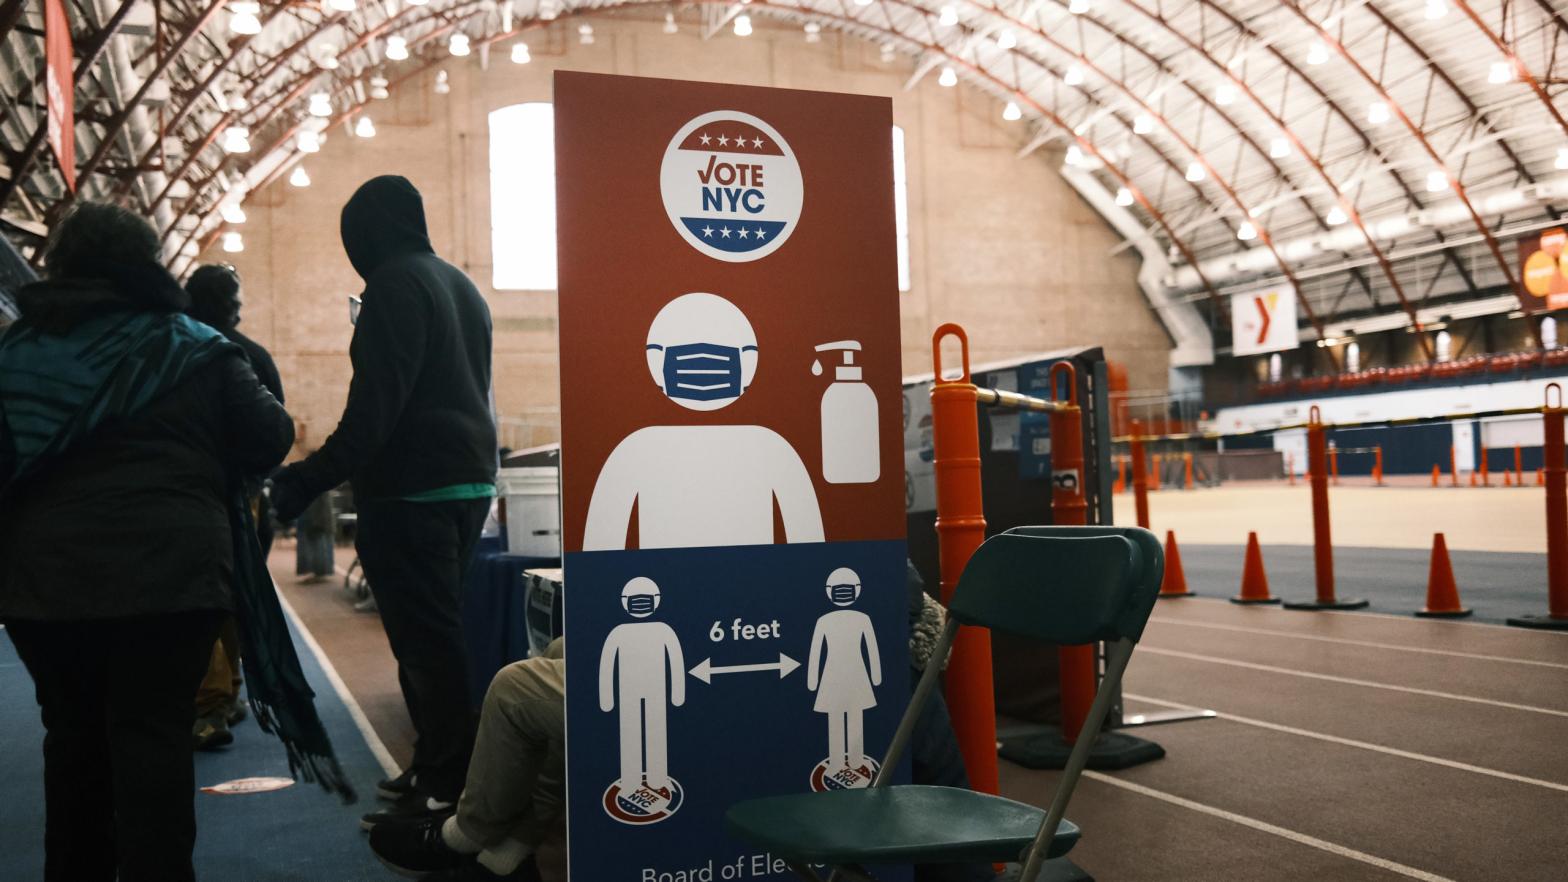 People voting at the Brooklyn Armory in New York City during early voting on October 28, 2020. (Photo: Spencer Platt, Getty Images)